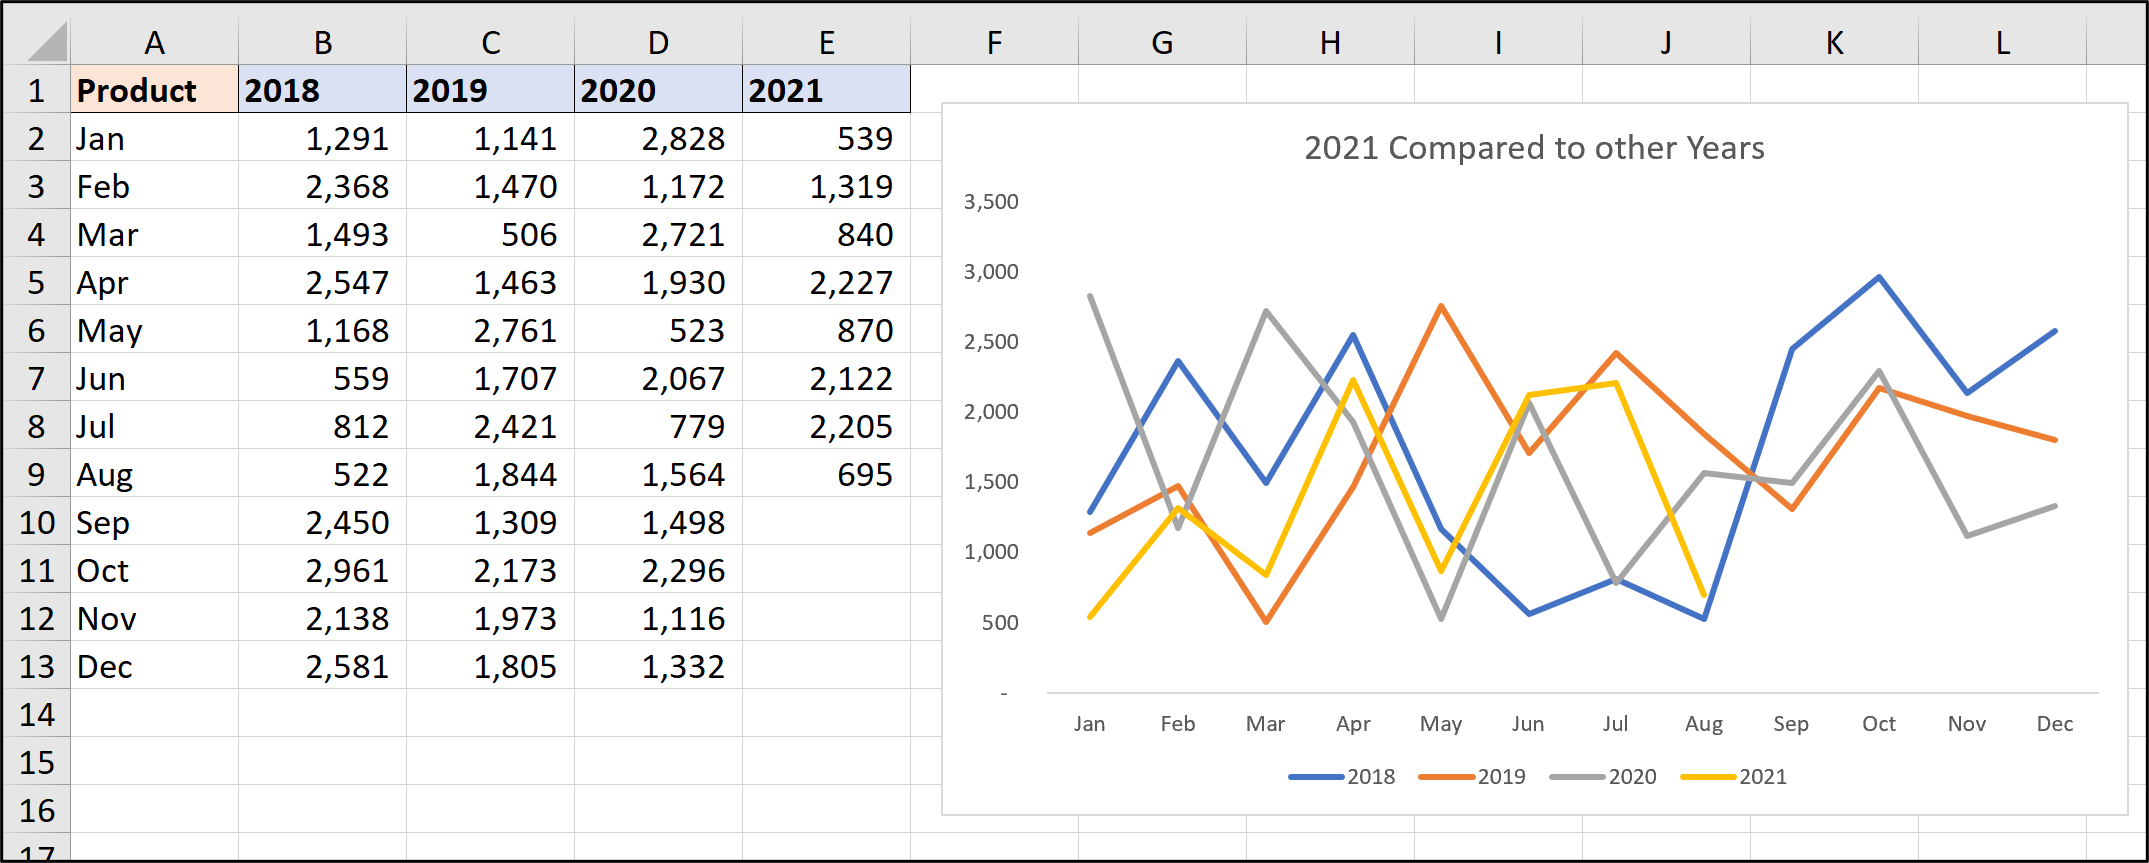 A chart and data in Excel